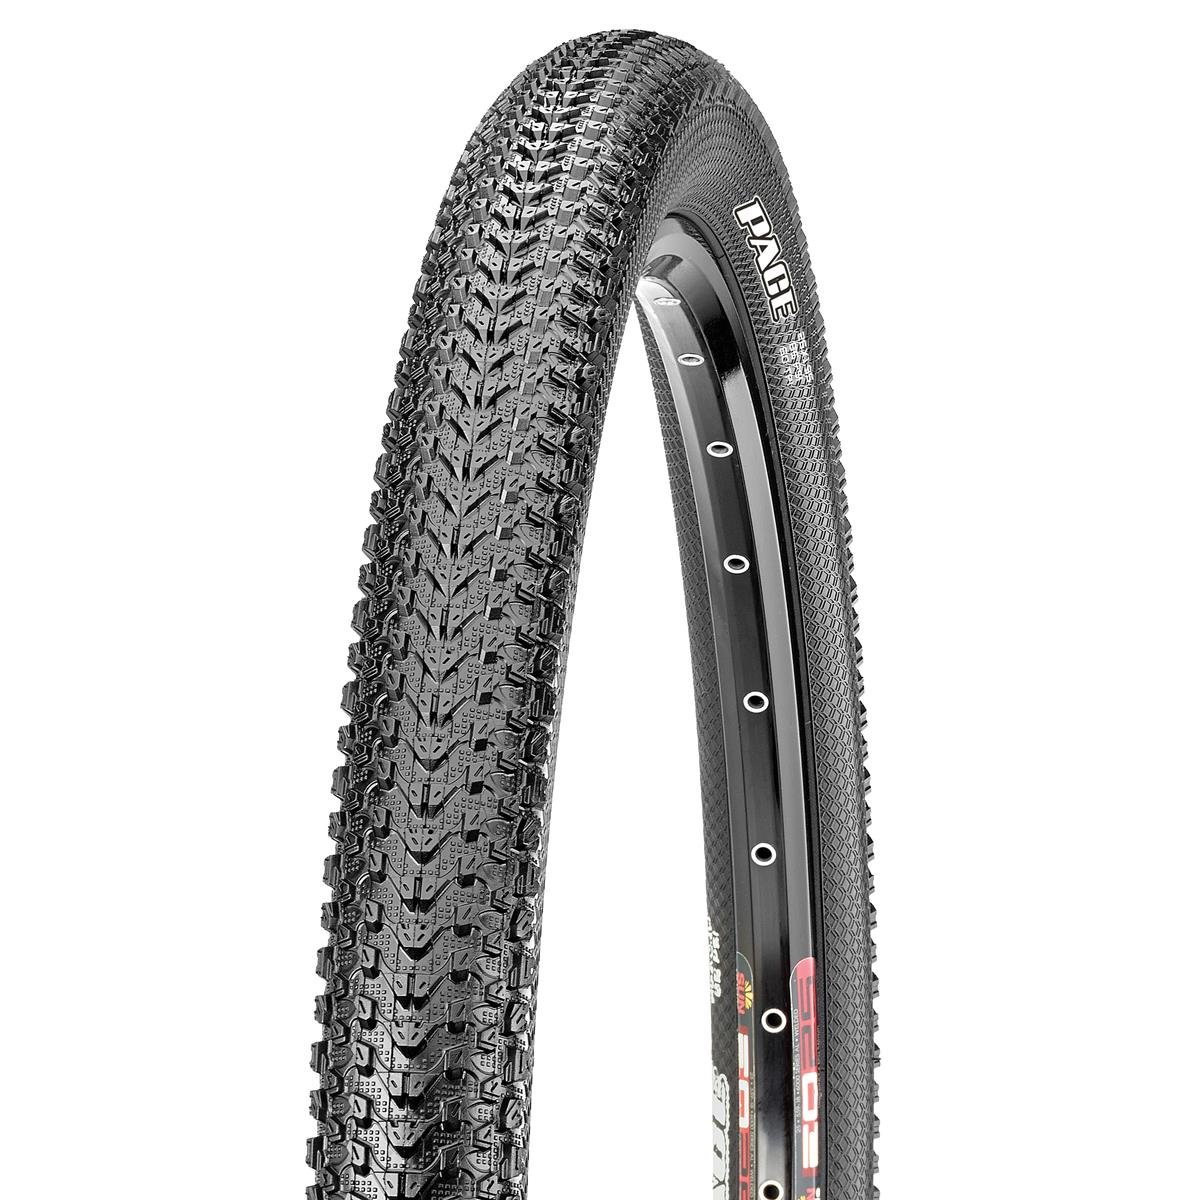 Maxxis MTB Tire Pace 1666 26 x 2.1, Foldable, MPC